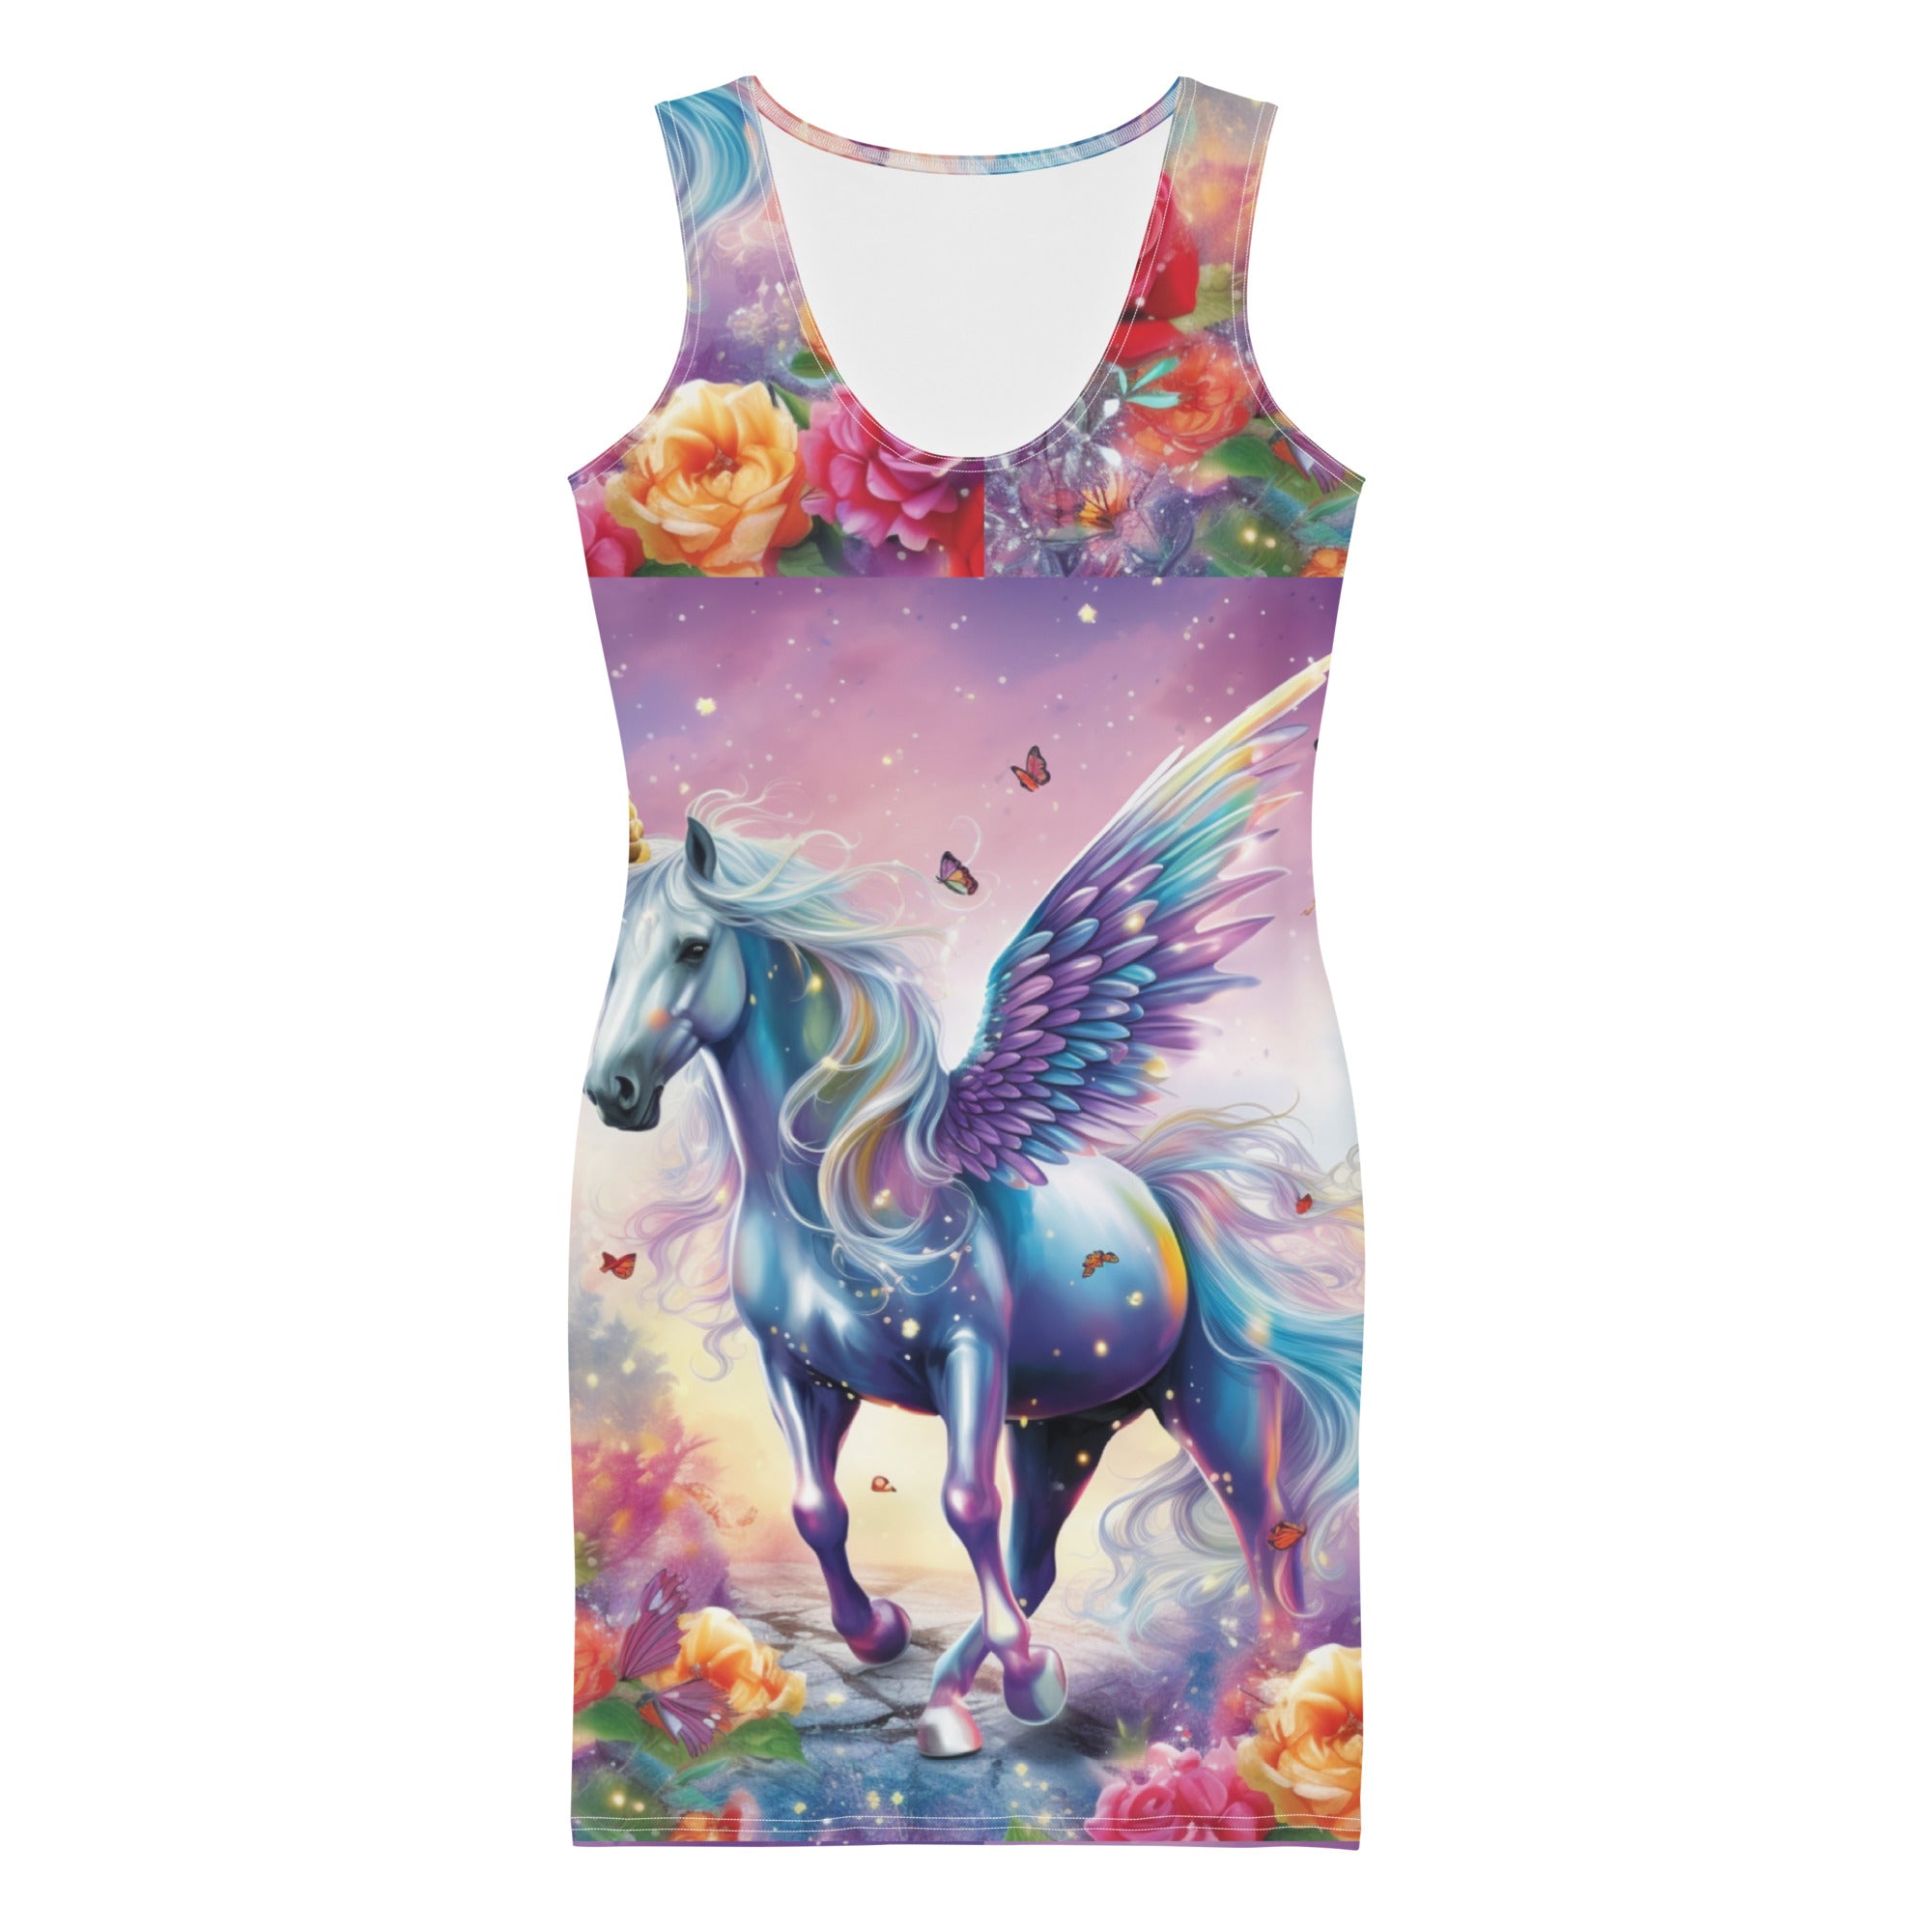 Unicorn Dreams Come True: Be Captivating in Our Fairy Style Dress